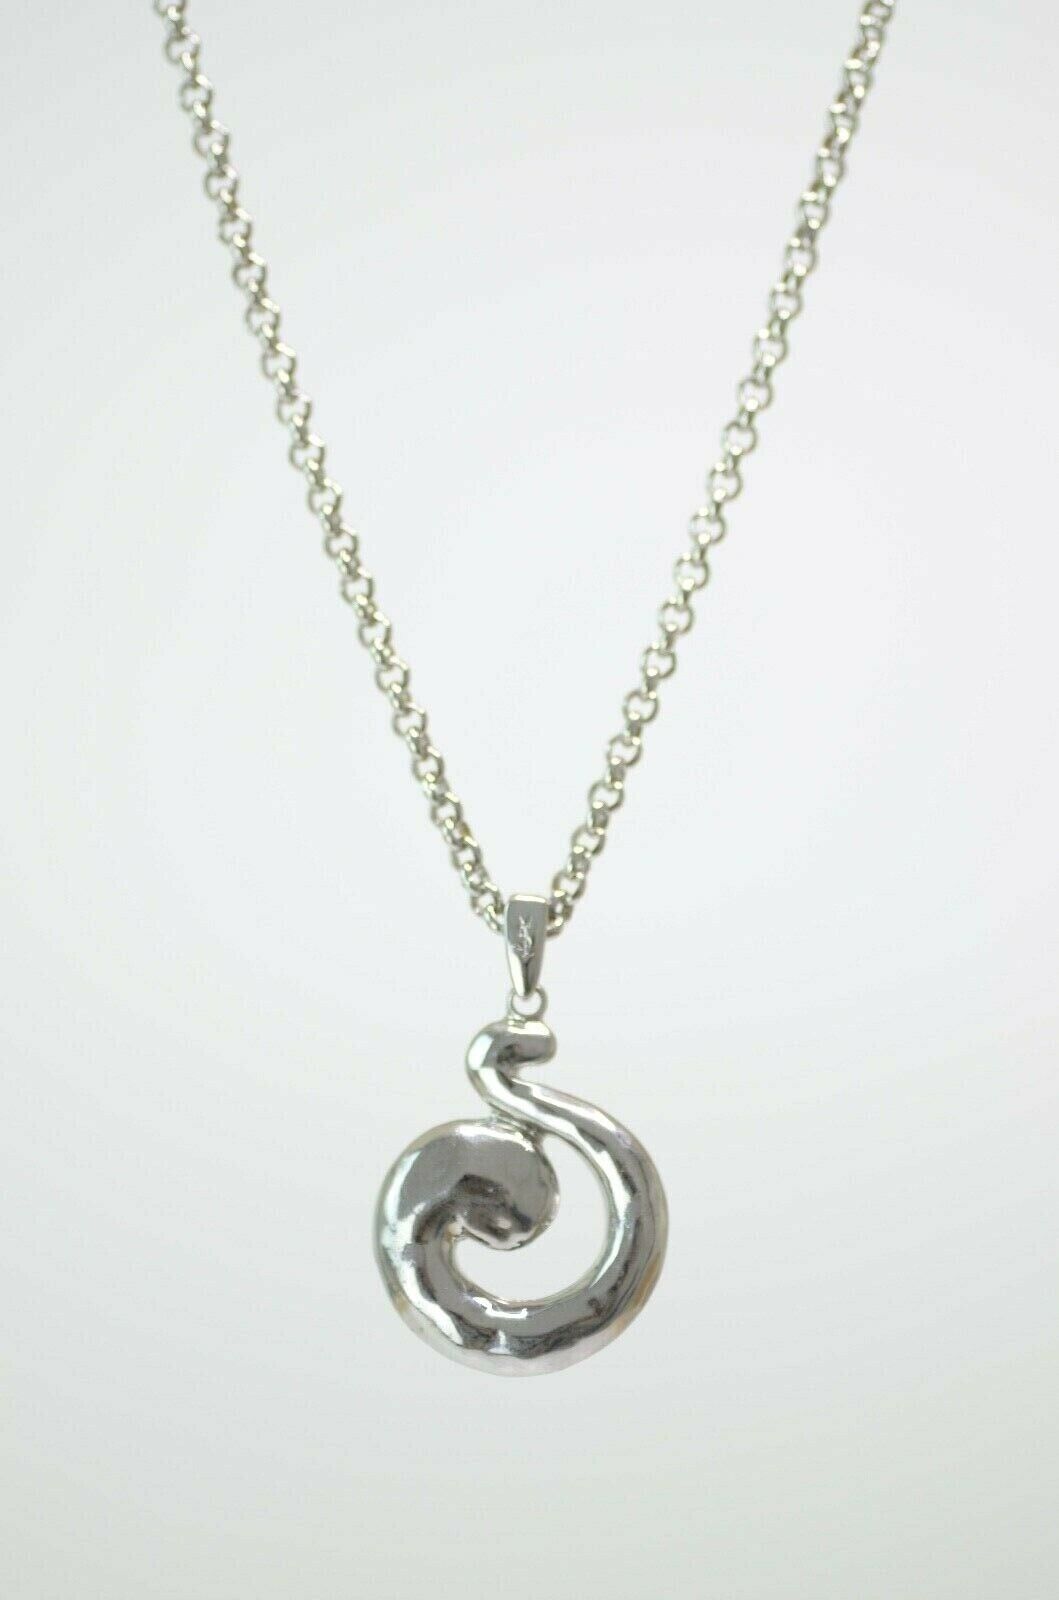 【SOLD OUT】YSL Yves Saint Laurent Silver Tone Coiled Spiral Pendant Vintage Long Necklace